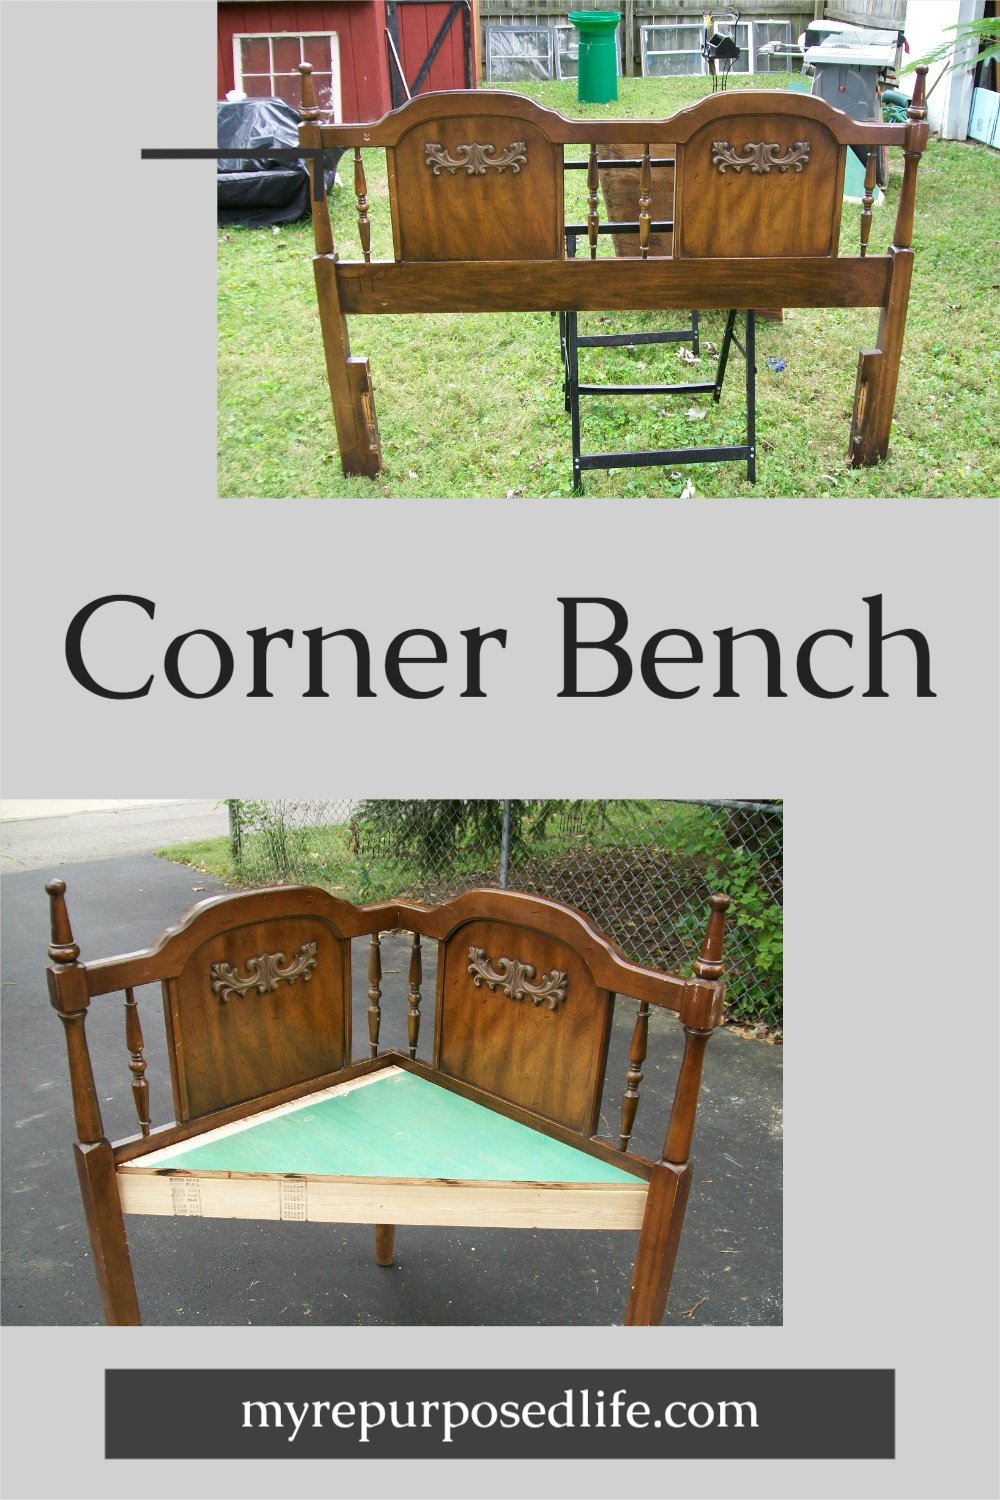 A large headboard is perfect for making a corner bench. Cut the large headboard in half and add a third leg and voila you have the perfect corner bench. #MyRepurposedLife #upcycle #repurpose #headboard #cornerbench #diy #tutorial via @repurposedlife